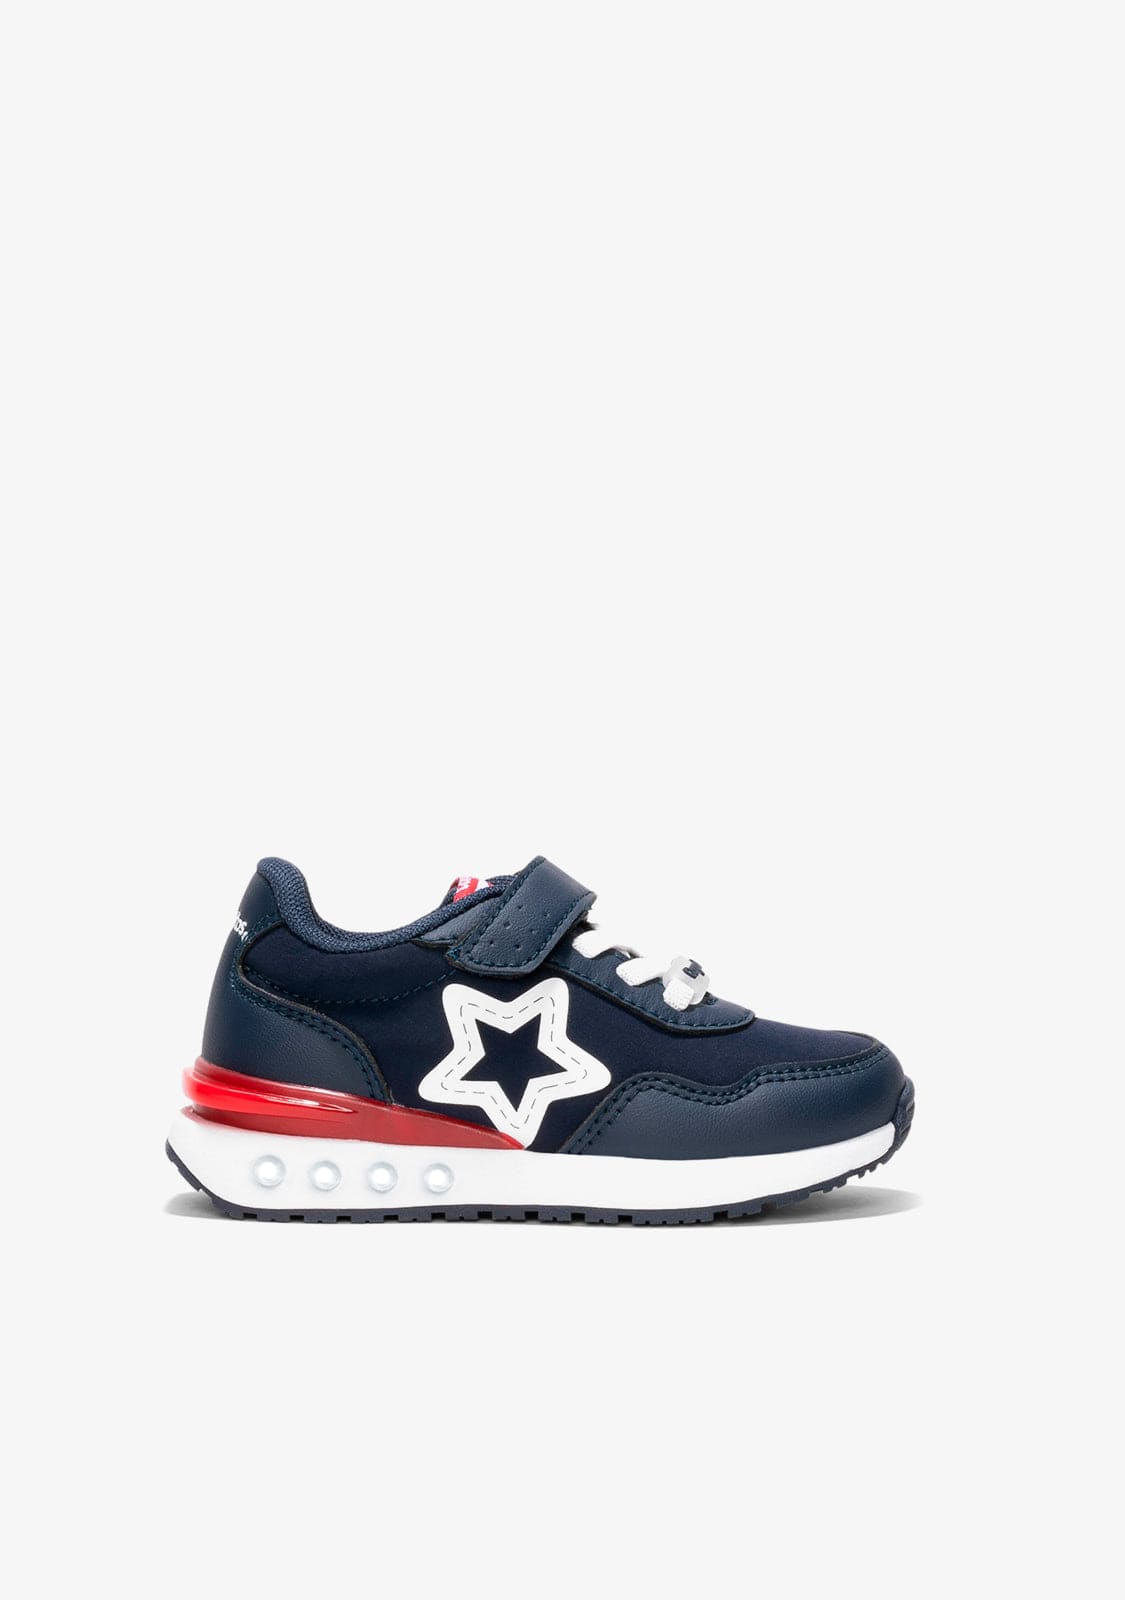 CONGUITOS Shoes Unisex Navy Star With Lights Sneakers